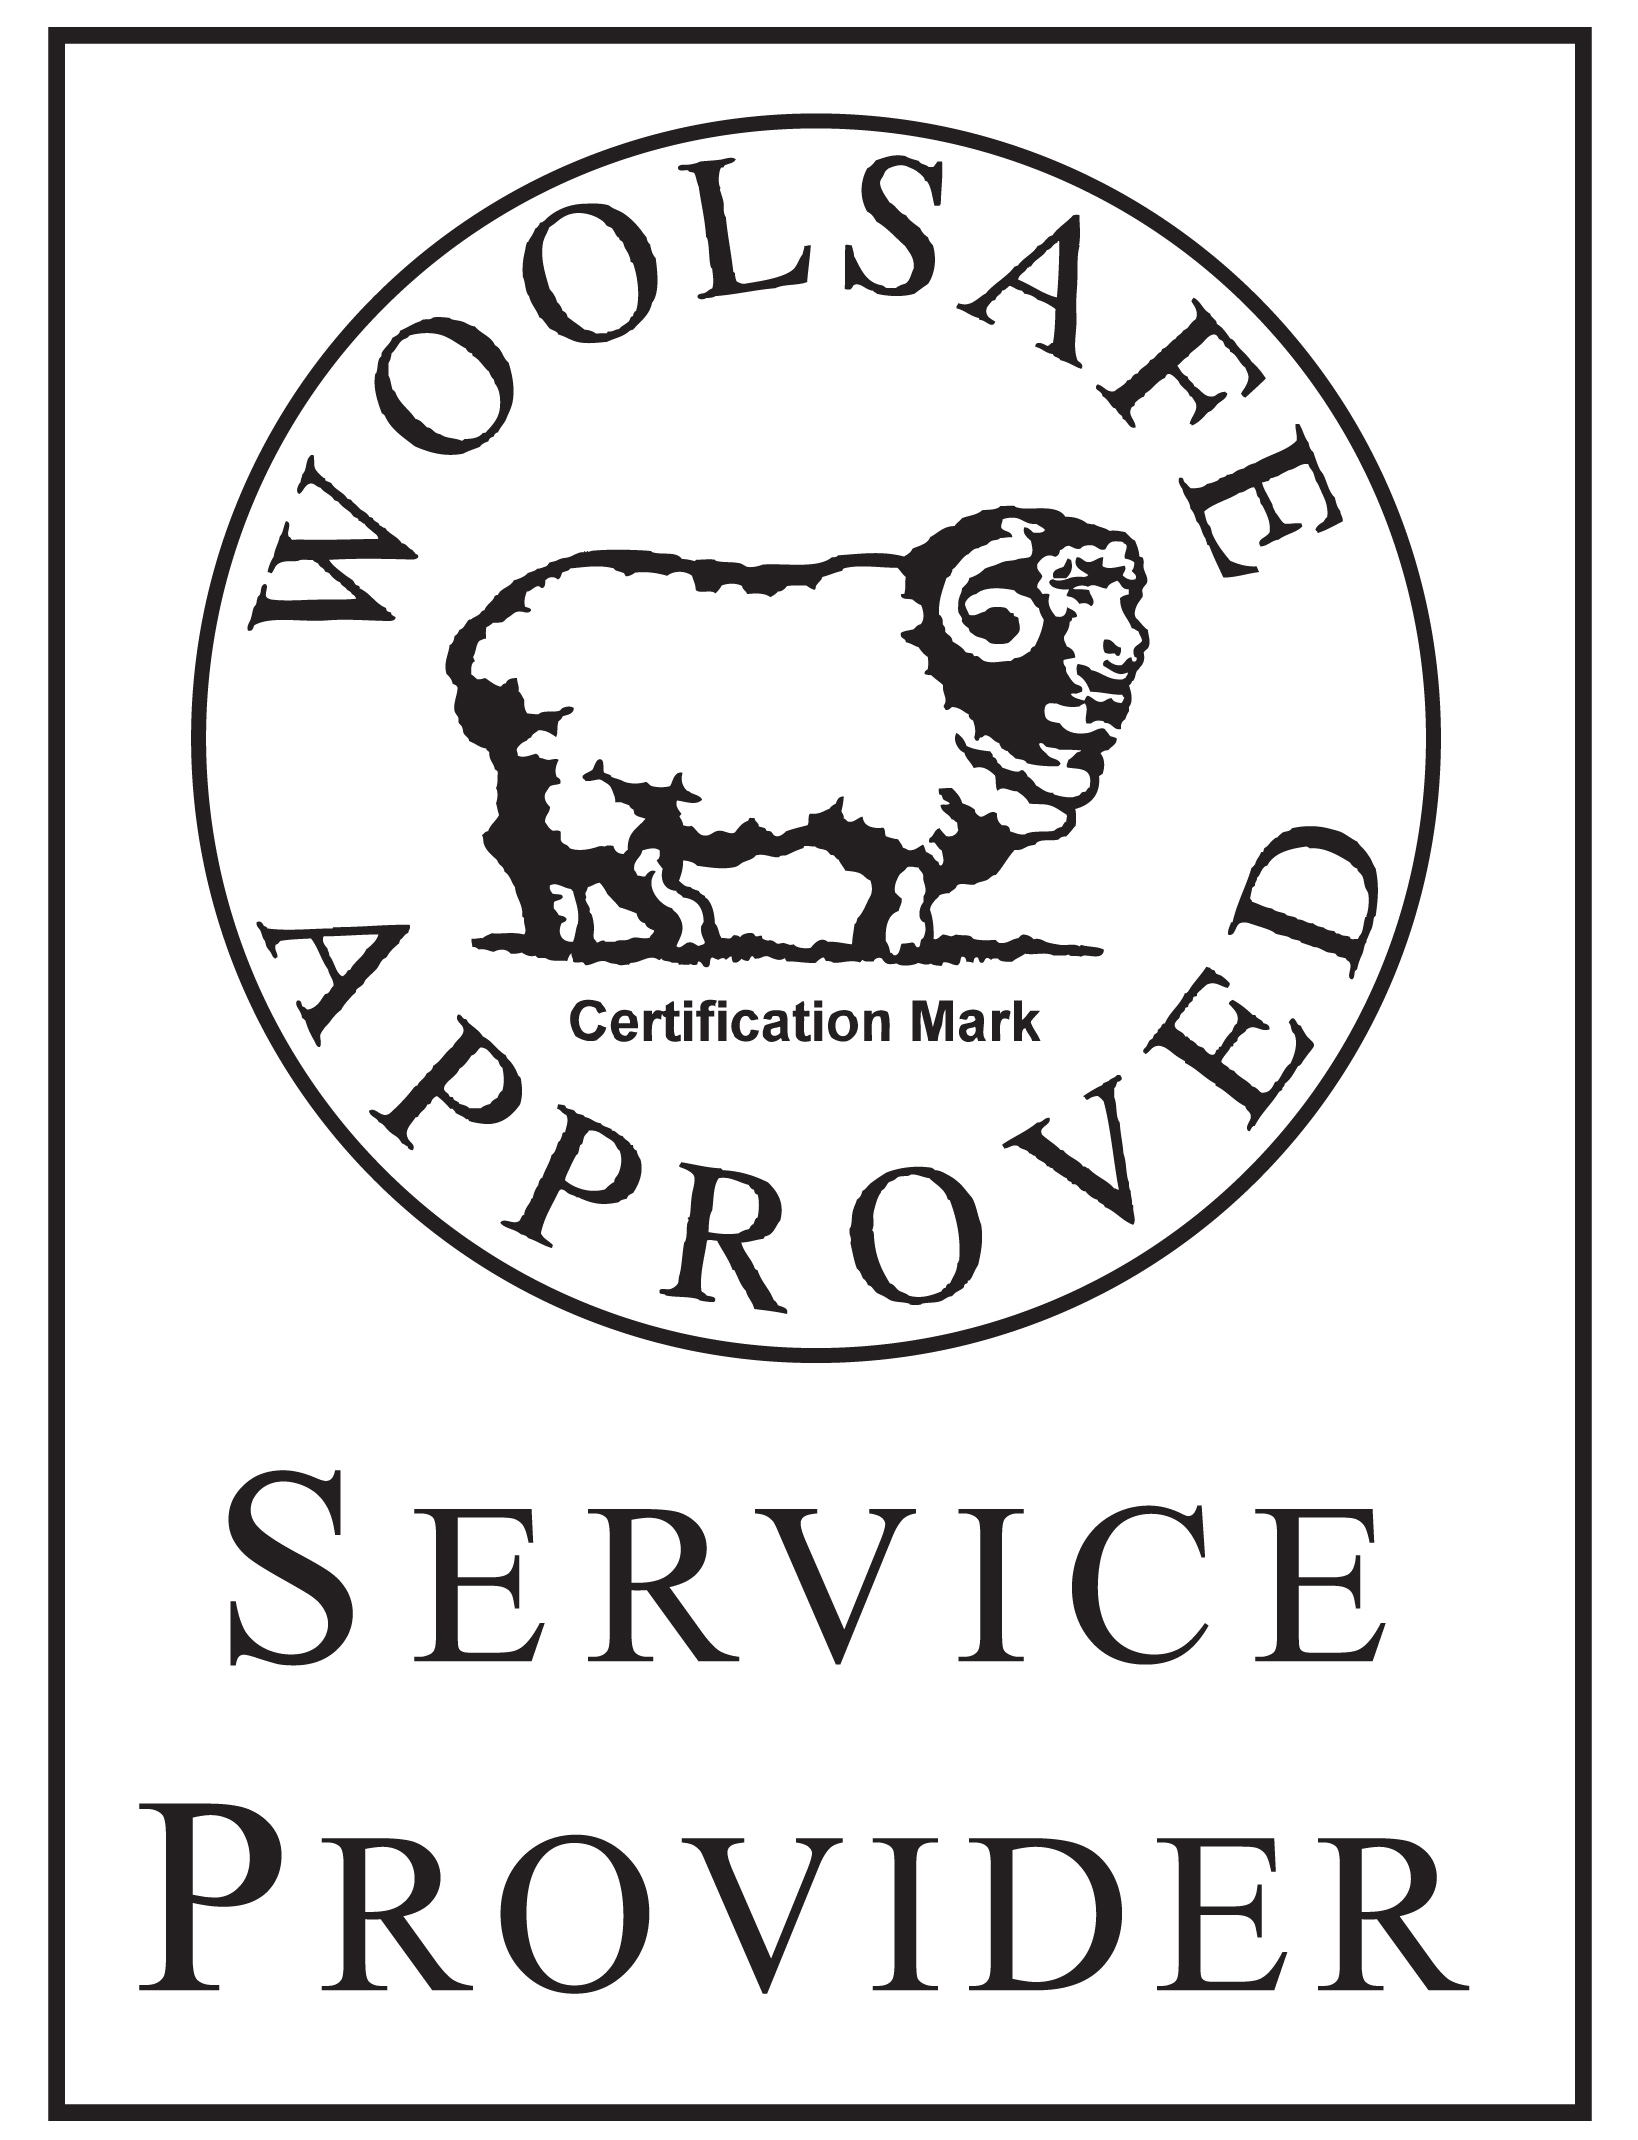 Barrys Professional Cleaning Woolsafe Certified